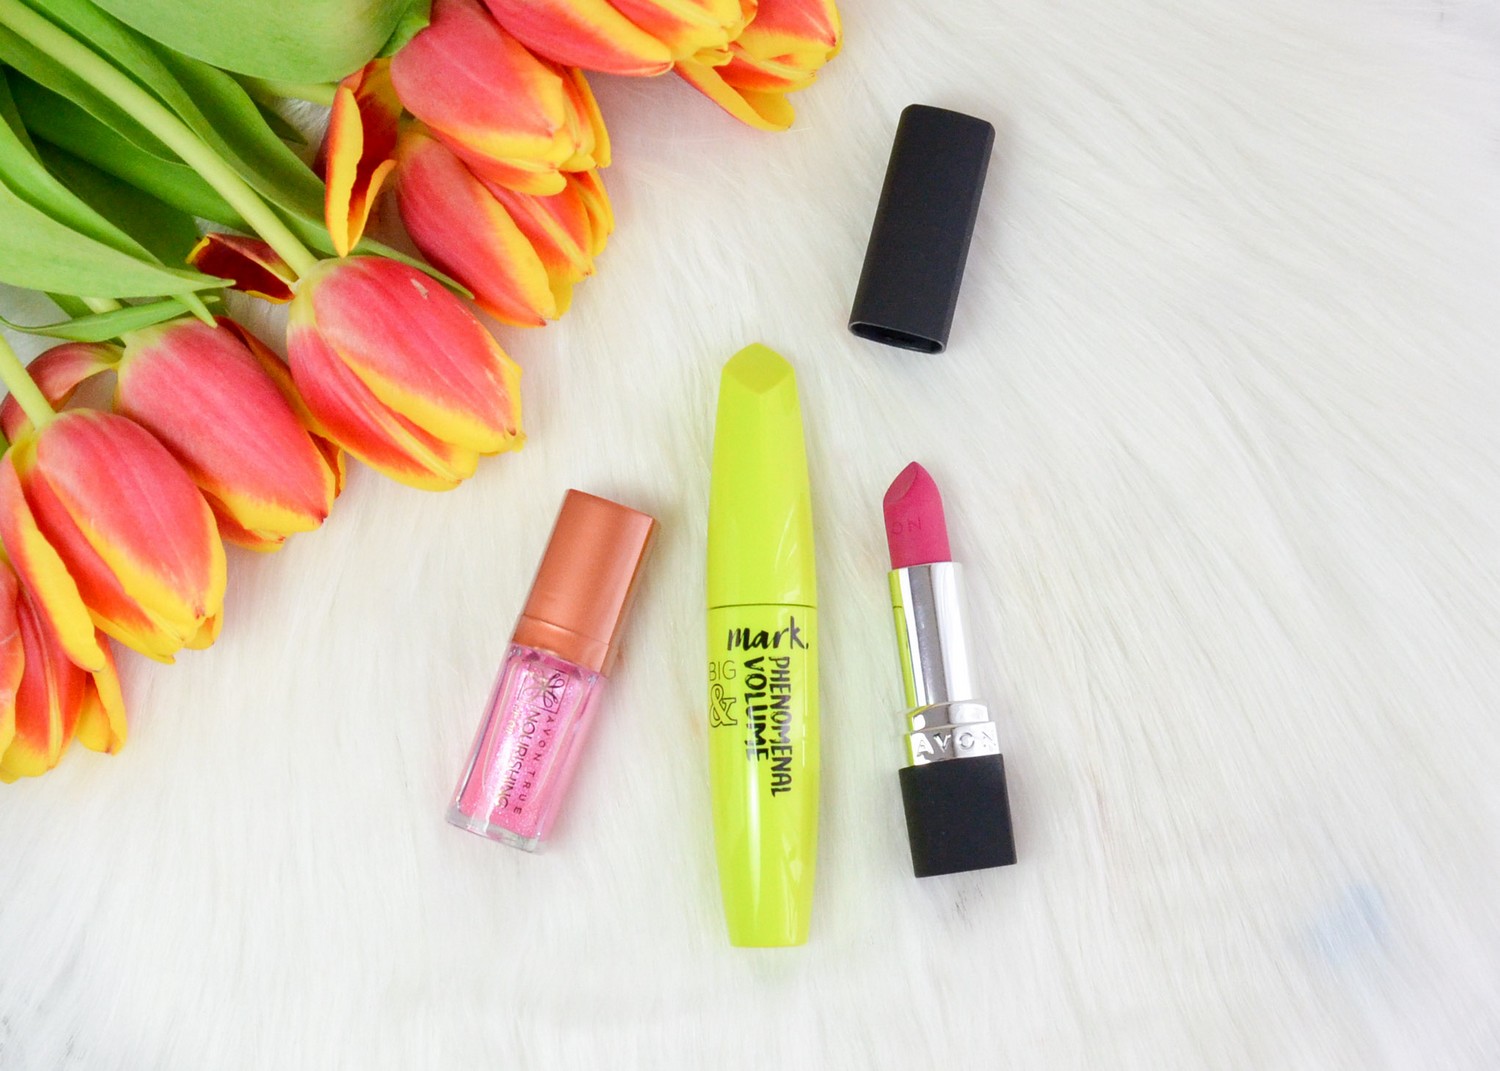 New Spring Products from Avon | Nourishing Lip Oil and Big & Phenomenal Volume Mascara